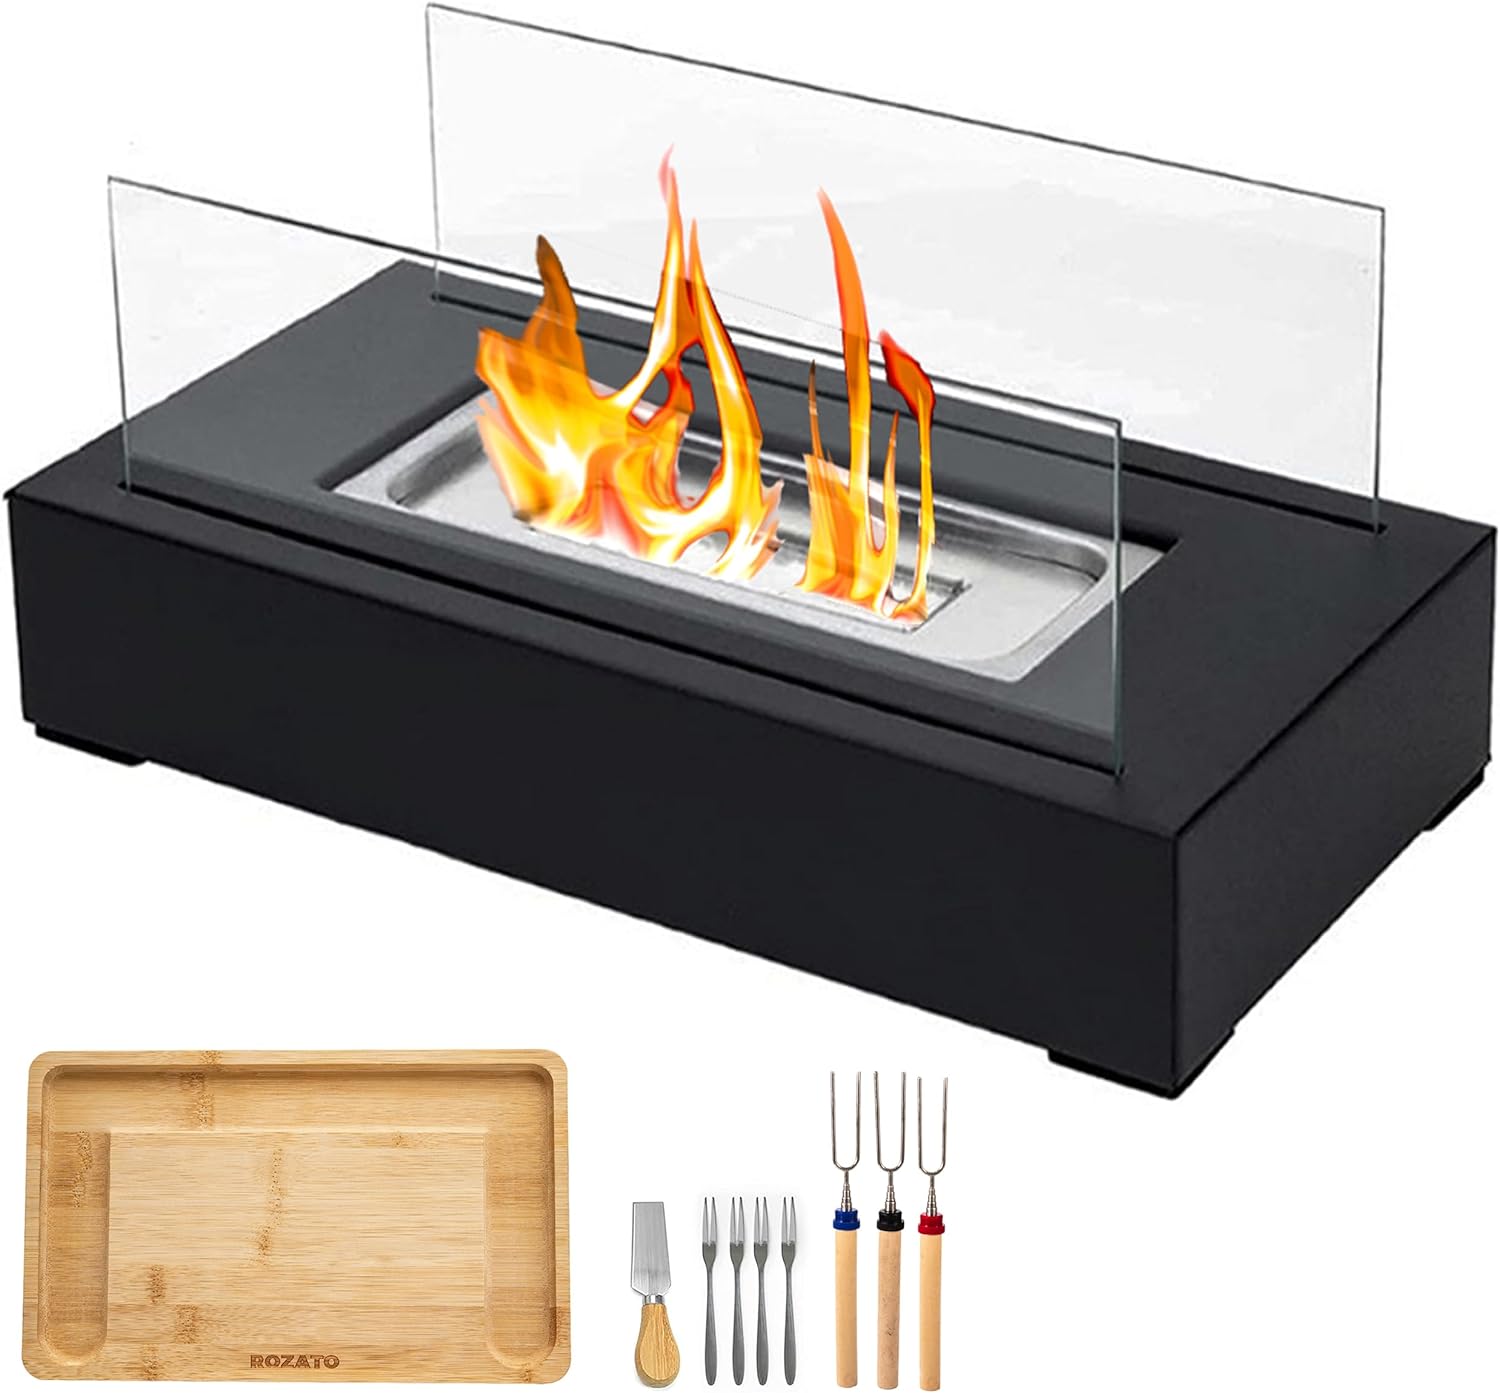 Read more about the article ROZATO Tabletop Fire Pit Review